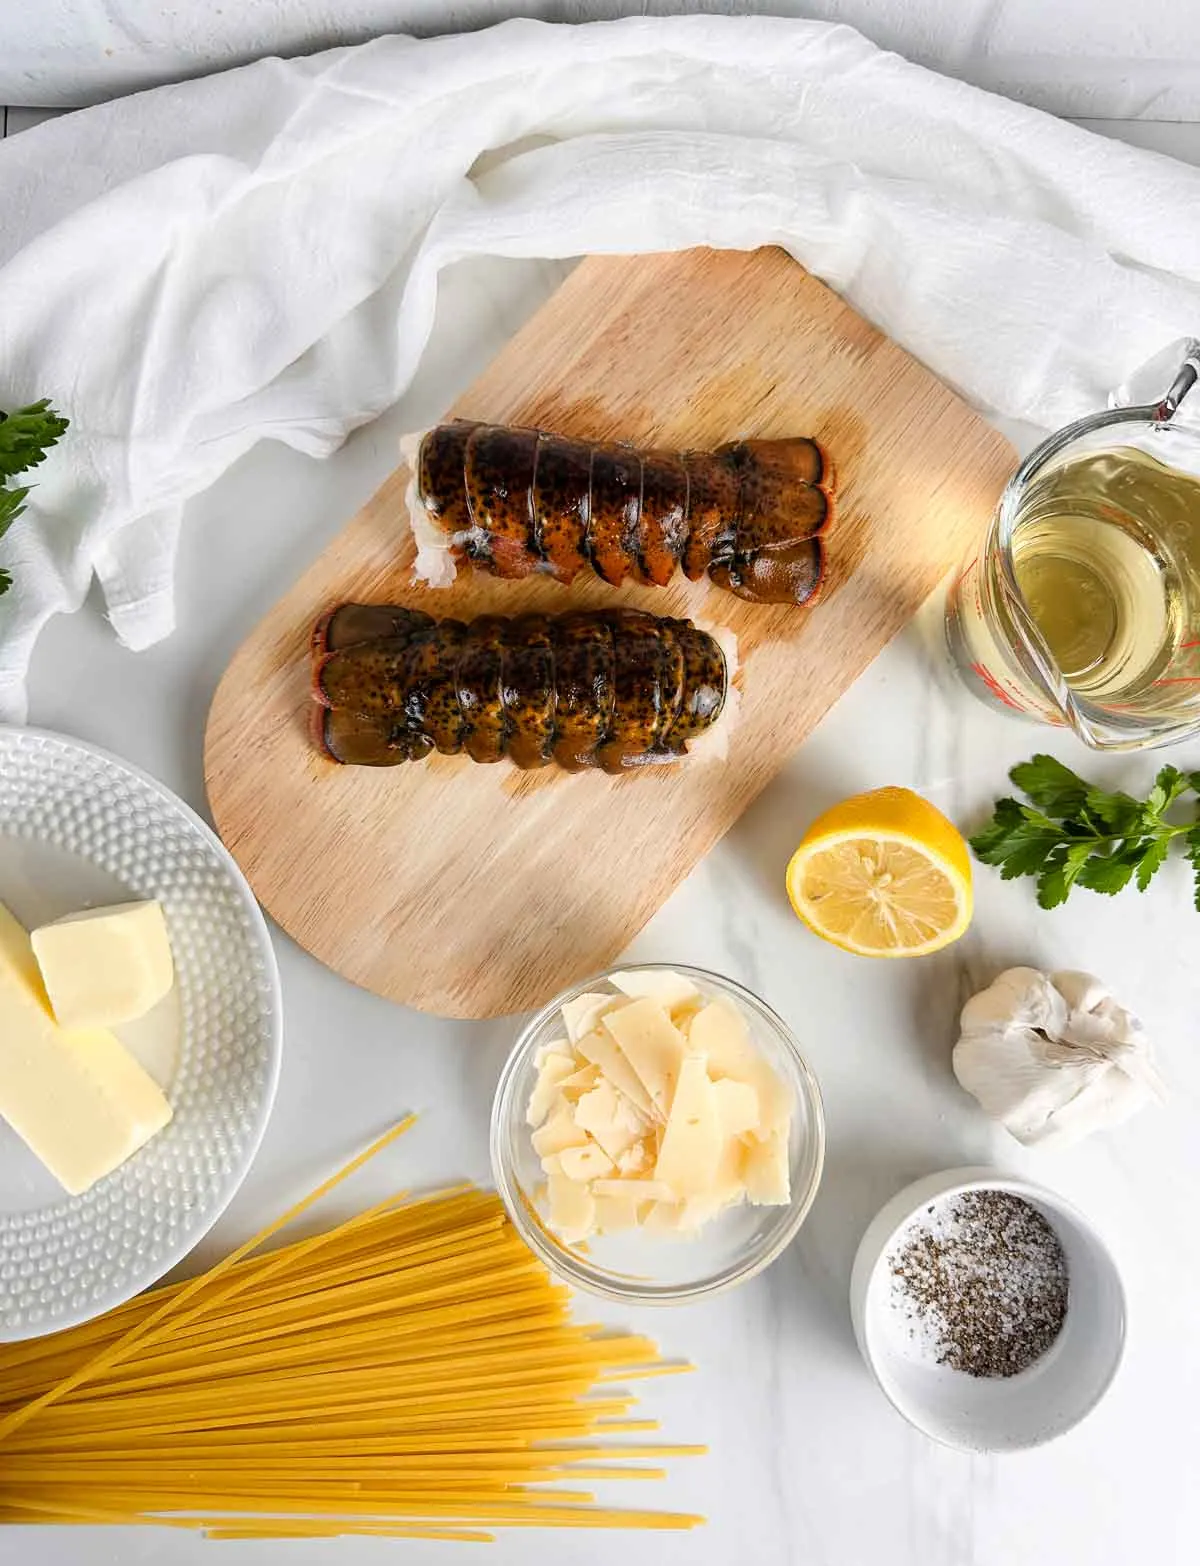 Ingredients for Brown Butter Lobster Pasta: Lobster Tail, Butter, White Wine, Linguine, Parmesan Cheese, Garlic, and Lemon